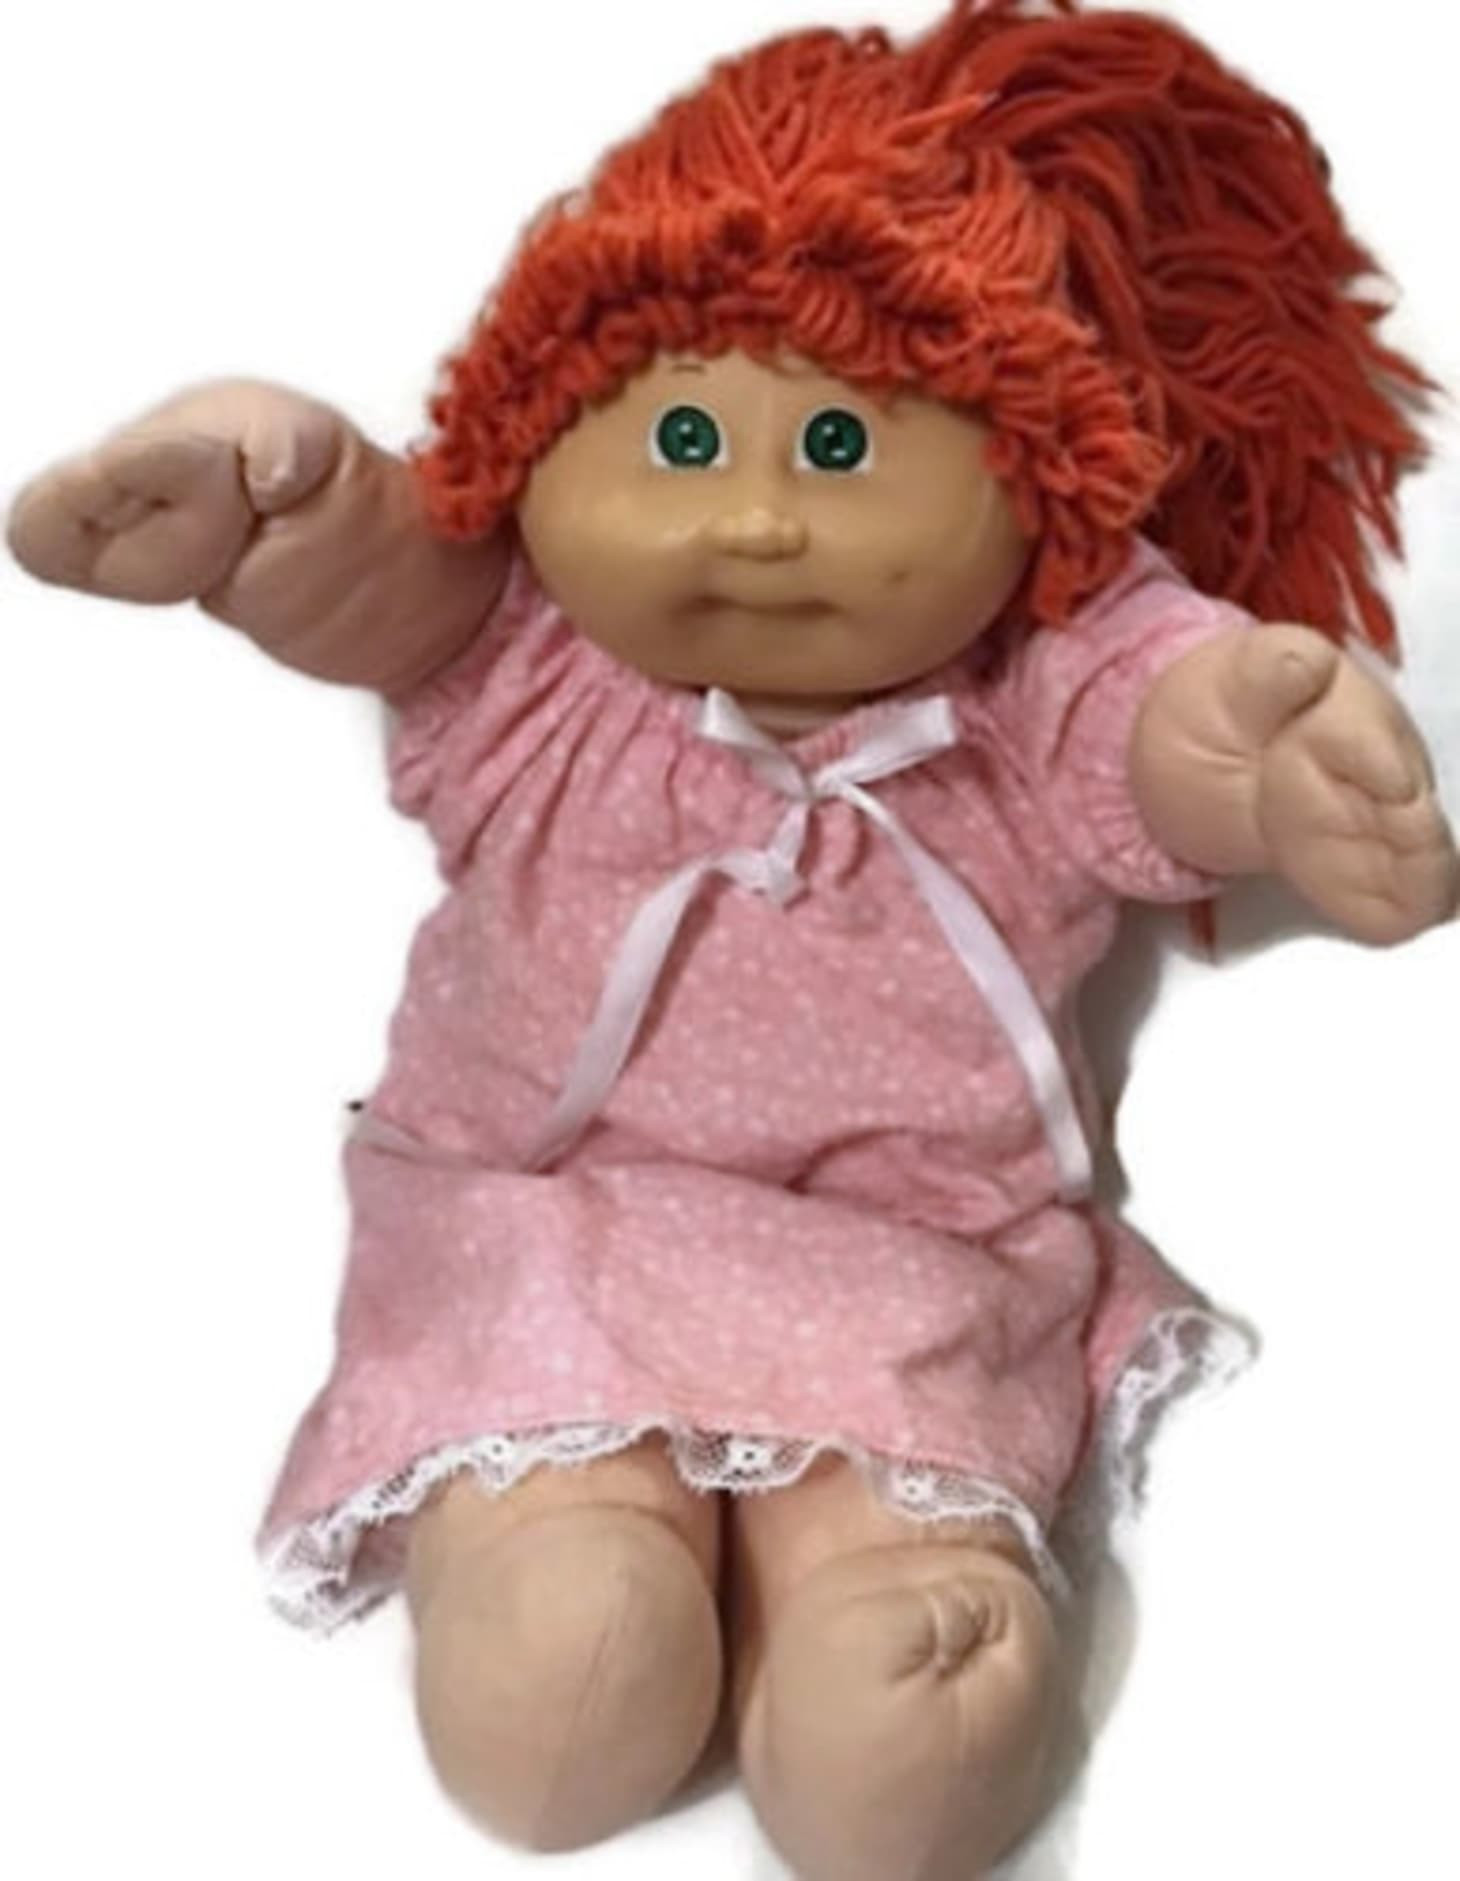 The Best 15 Cabbage Patch Kids Value